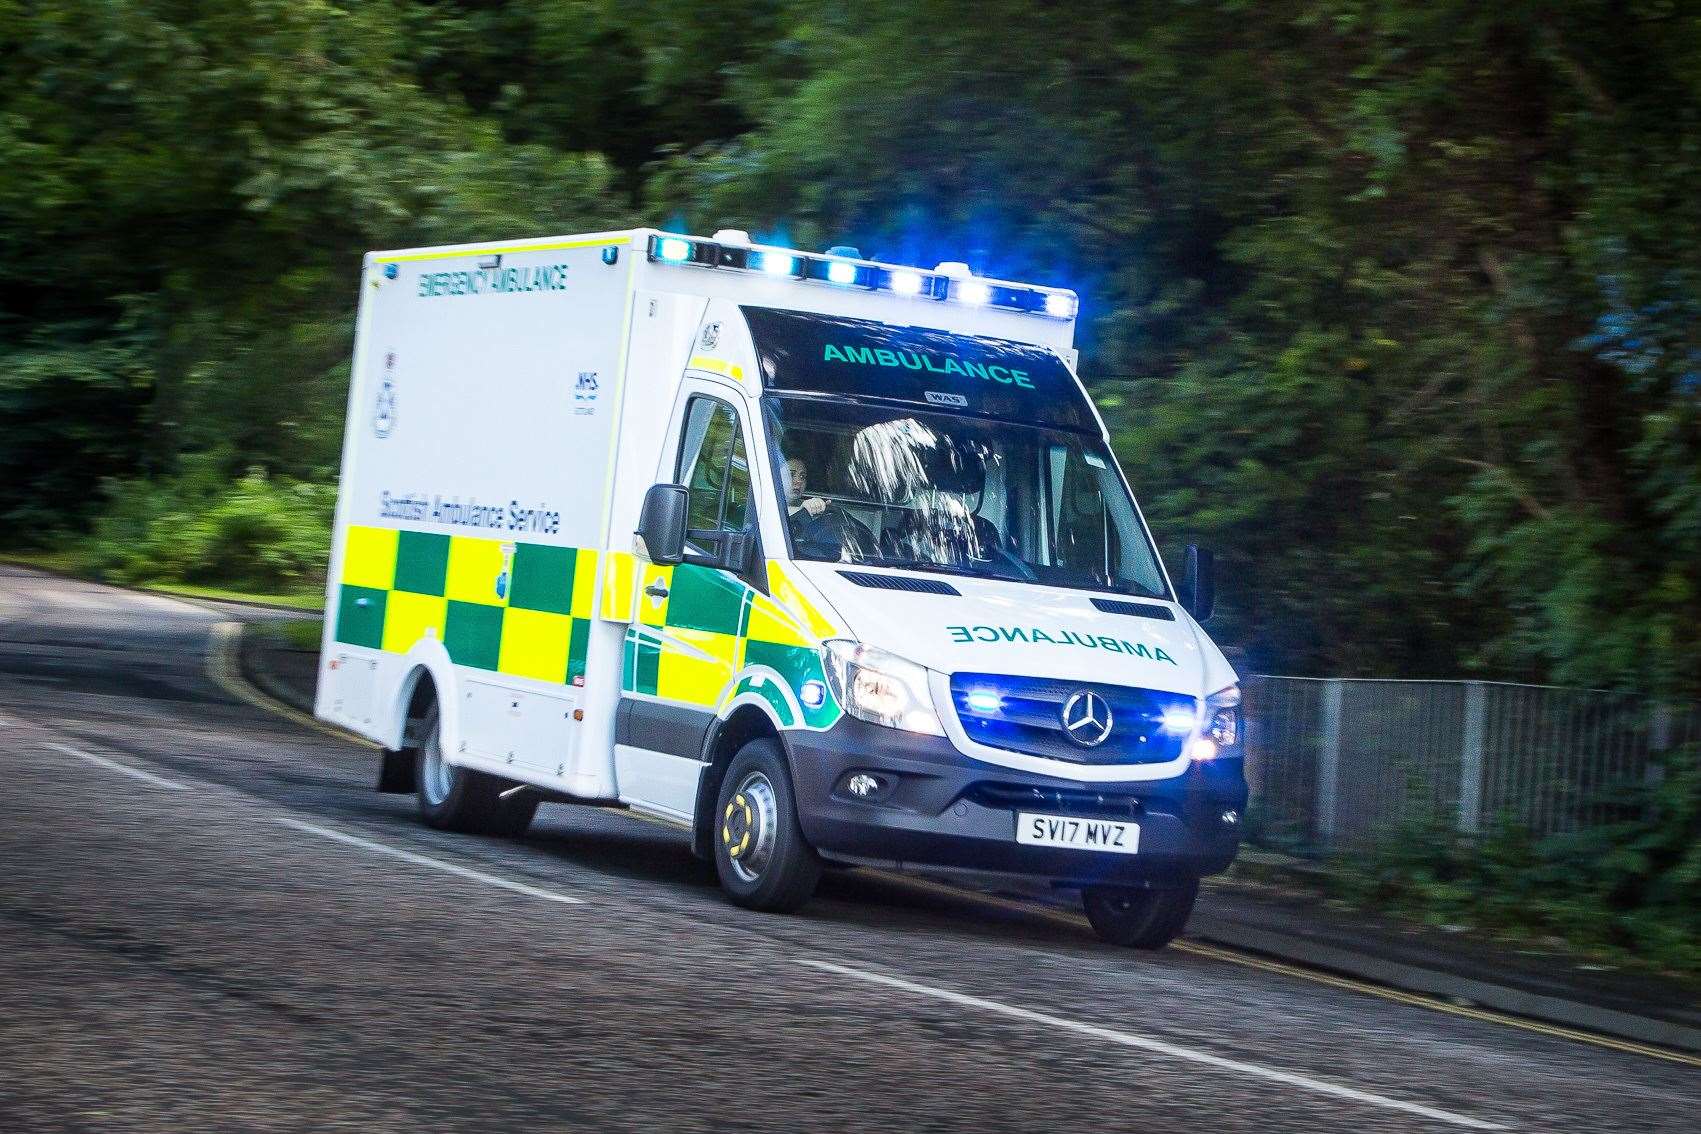 Residents in Turriff are waiting more than twice as long for an ambulance as those in other parts of Aberdeenshire, new figures have revealed